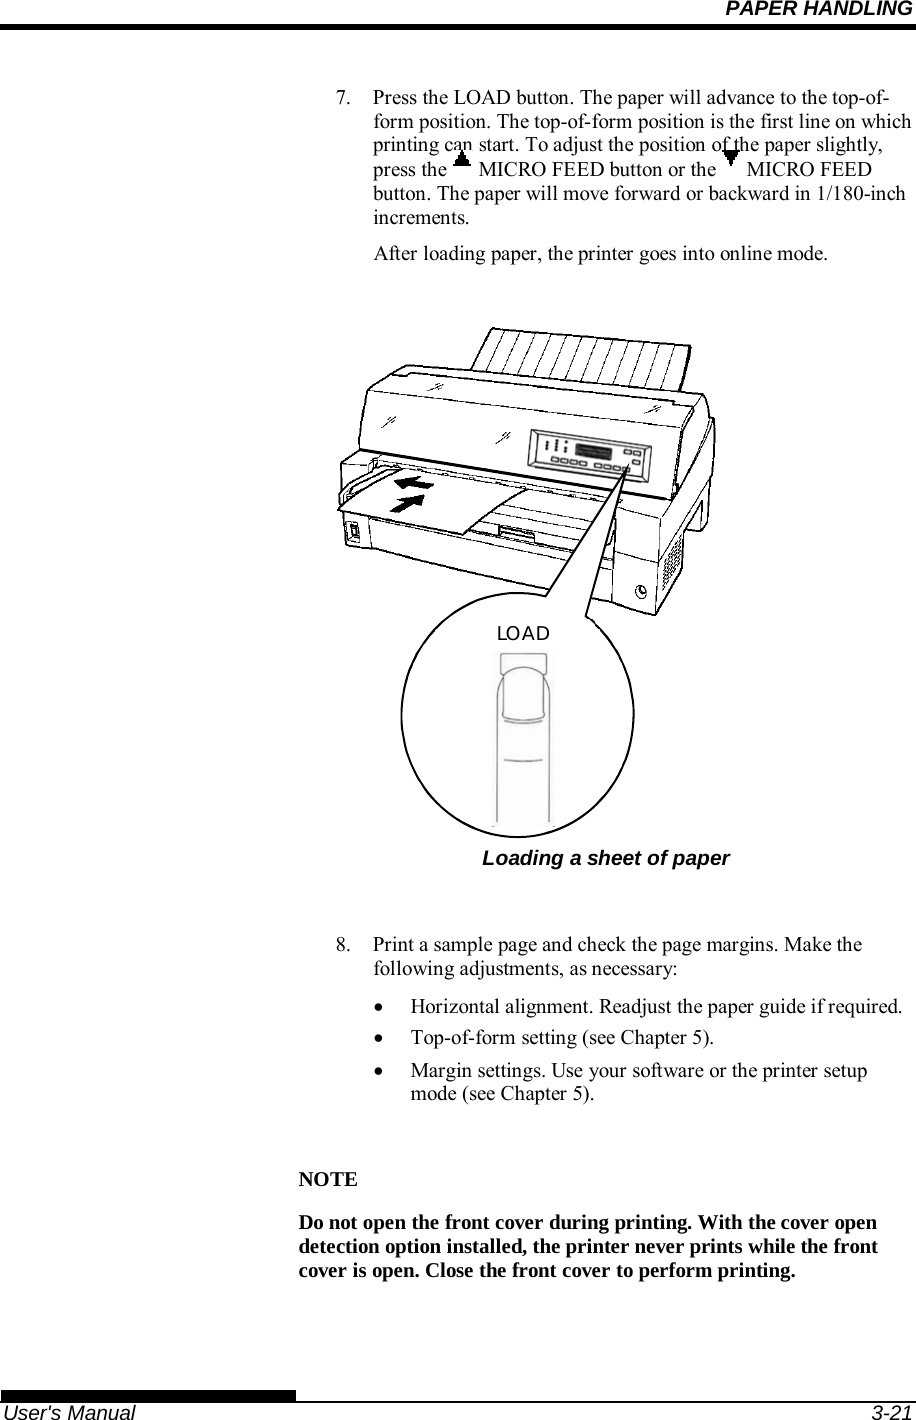 PAPER HANDLING   User&apos;s Manual  3-21 7.  Press the LOAD button. The paper will advance to the top-of-form position. The top-of-form position is the first line on which printing can start. To adjust the position of the paper slightly, press the   MICRO FEED button or the   MICRO FEED button. The paper will move forward or backward in 1/180-inch increments. After loading paper, the printer goes into online mode.         Loading a sheet of paper  8.  Print a sample page and check the page margins. Make the following adjustments, as necessary:   Horizontal alignment. Readjust the paper guide if required.   Top-of-form setting (see Chapter 5).   Margin settings. Use your software or the printer setup mode (see Chapter 5).  NOTE Do not open the front cover during printing. With the cover open detection option installed, the printer never prints while the front cover is open. Close the front cover to perform printing.  LOAD 